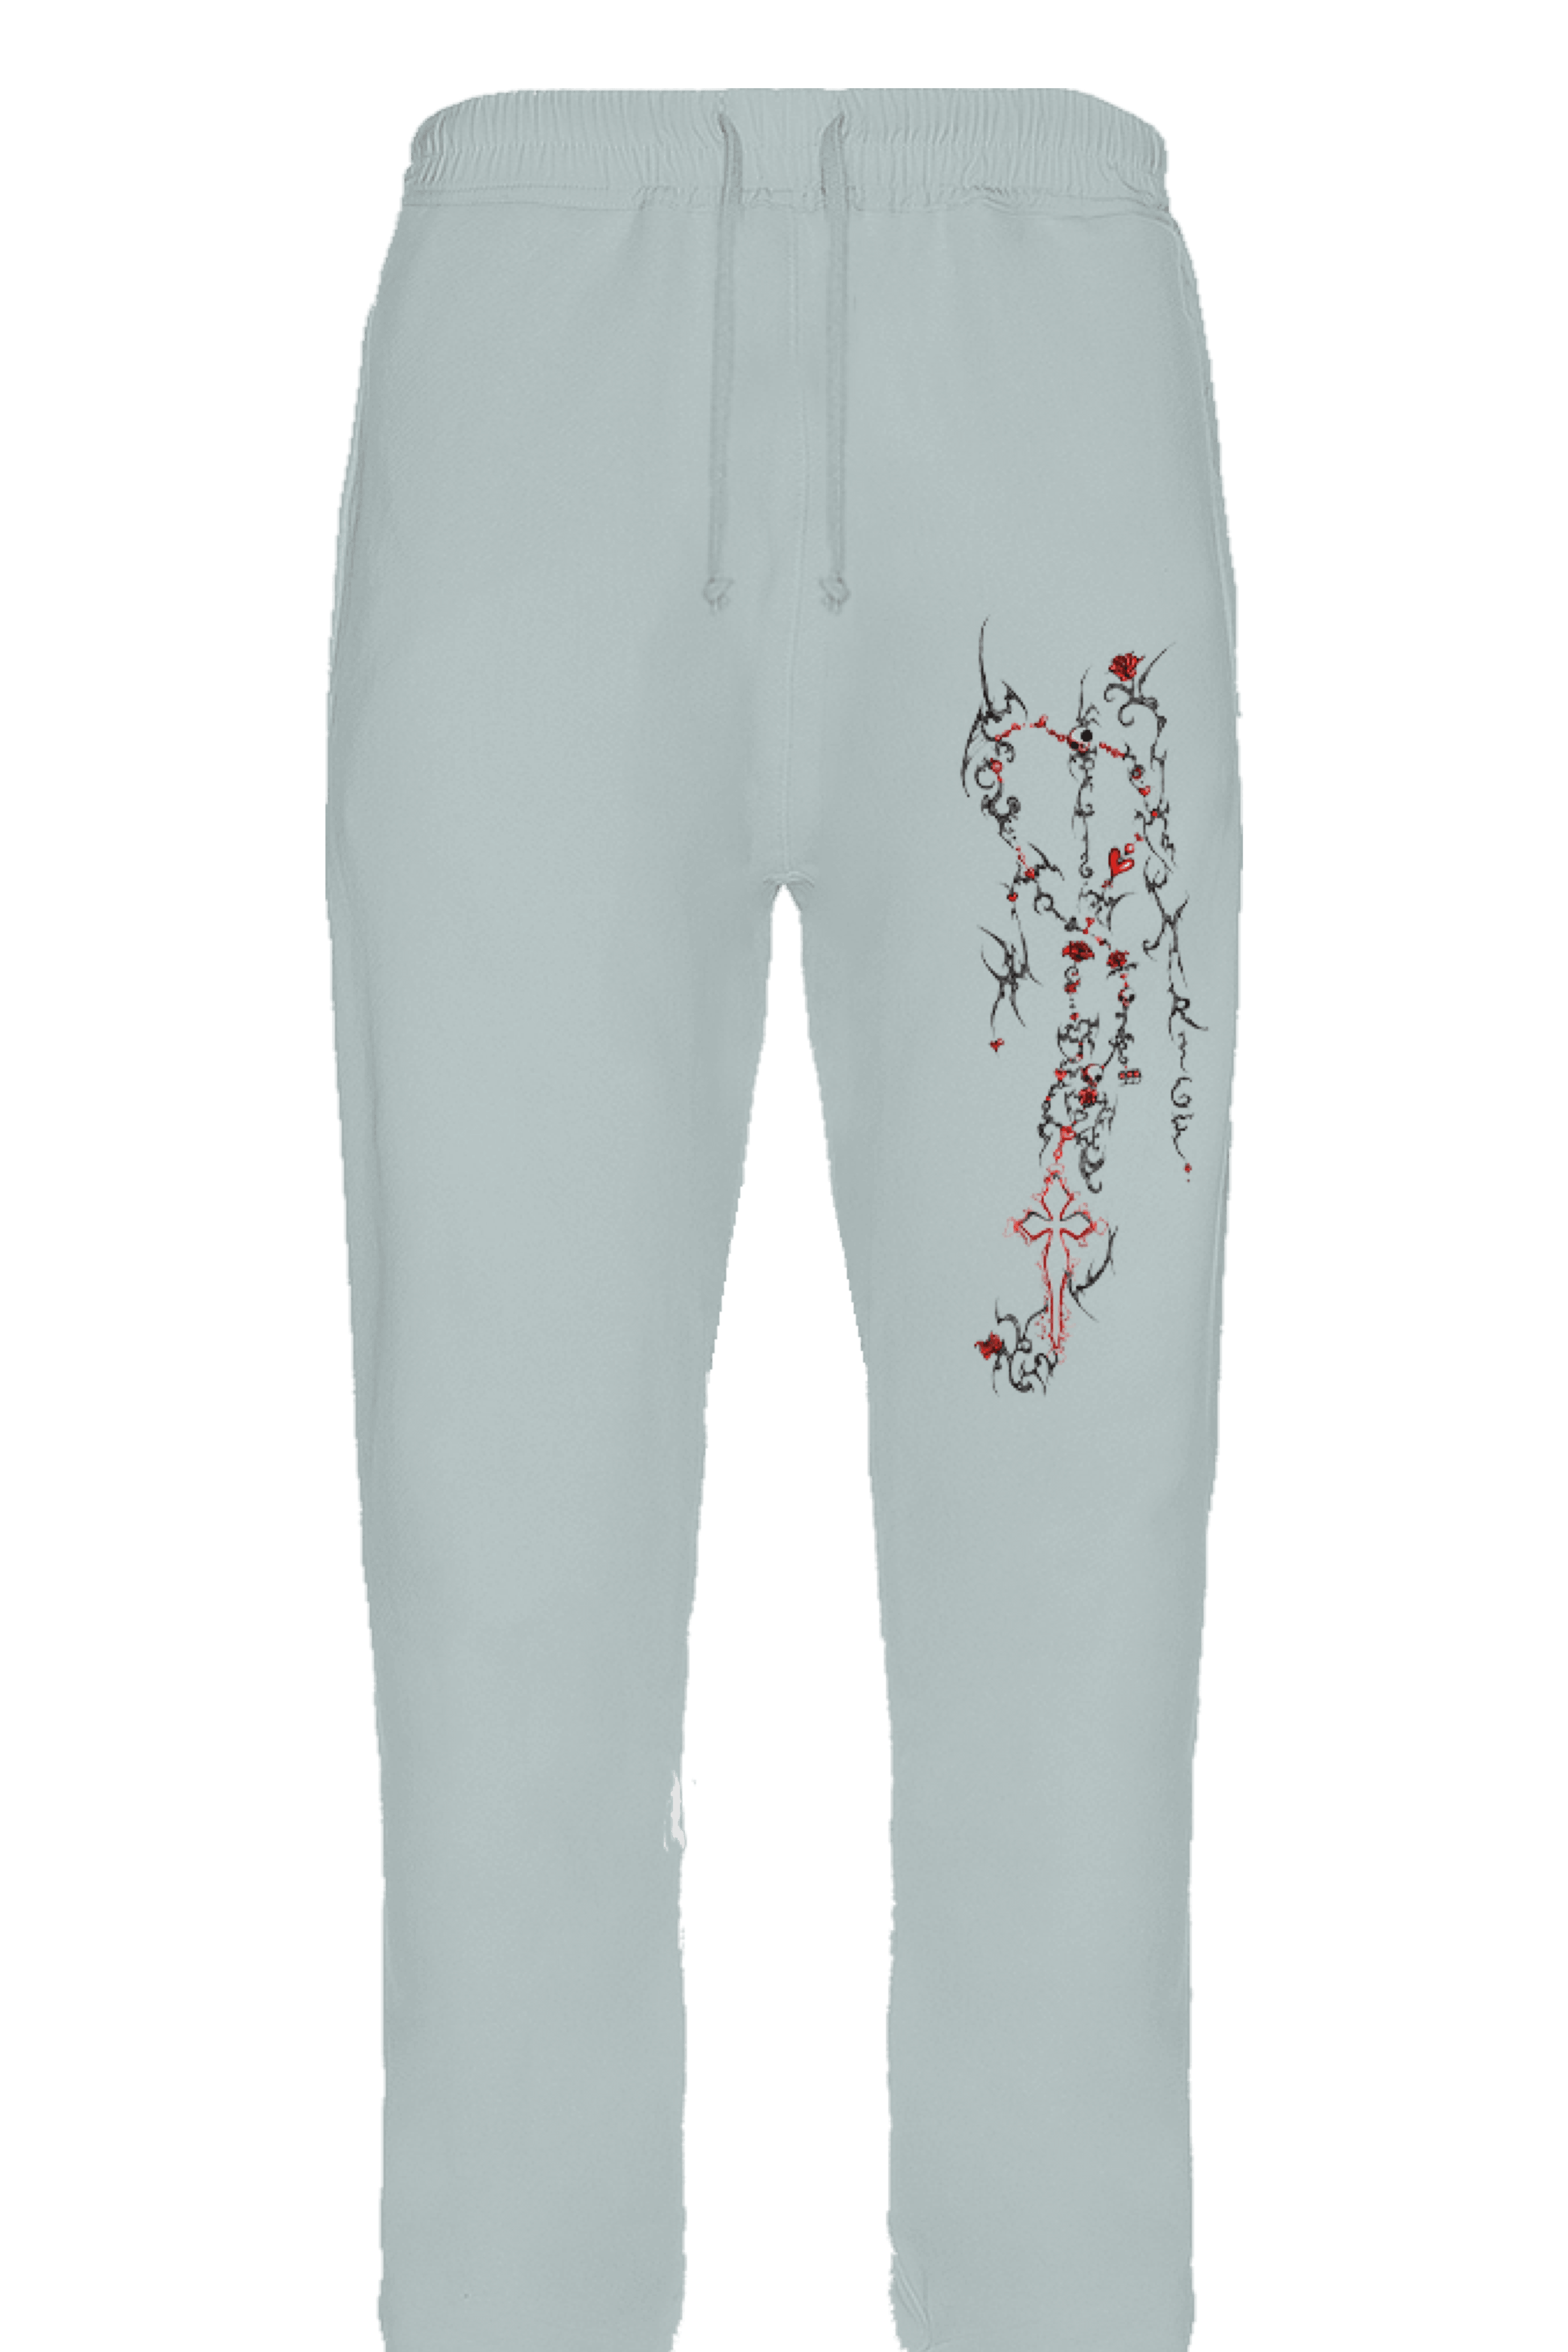 PATCH PANT - PATCH PANT - ROSE IN GOOD FAITH